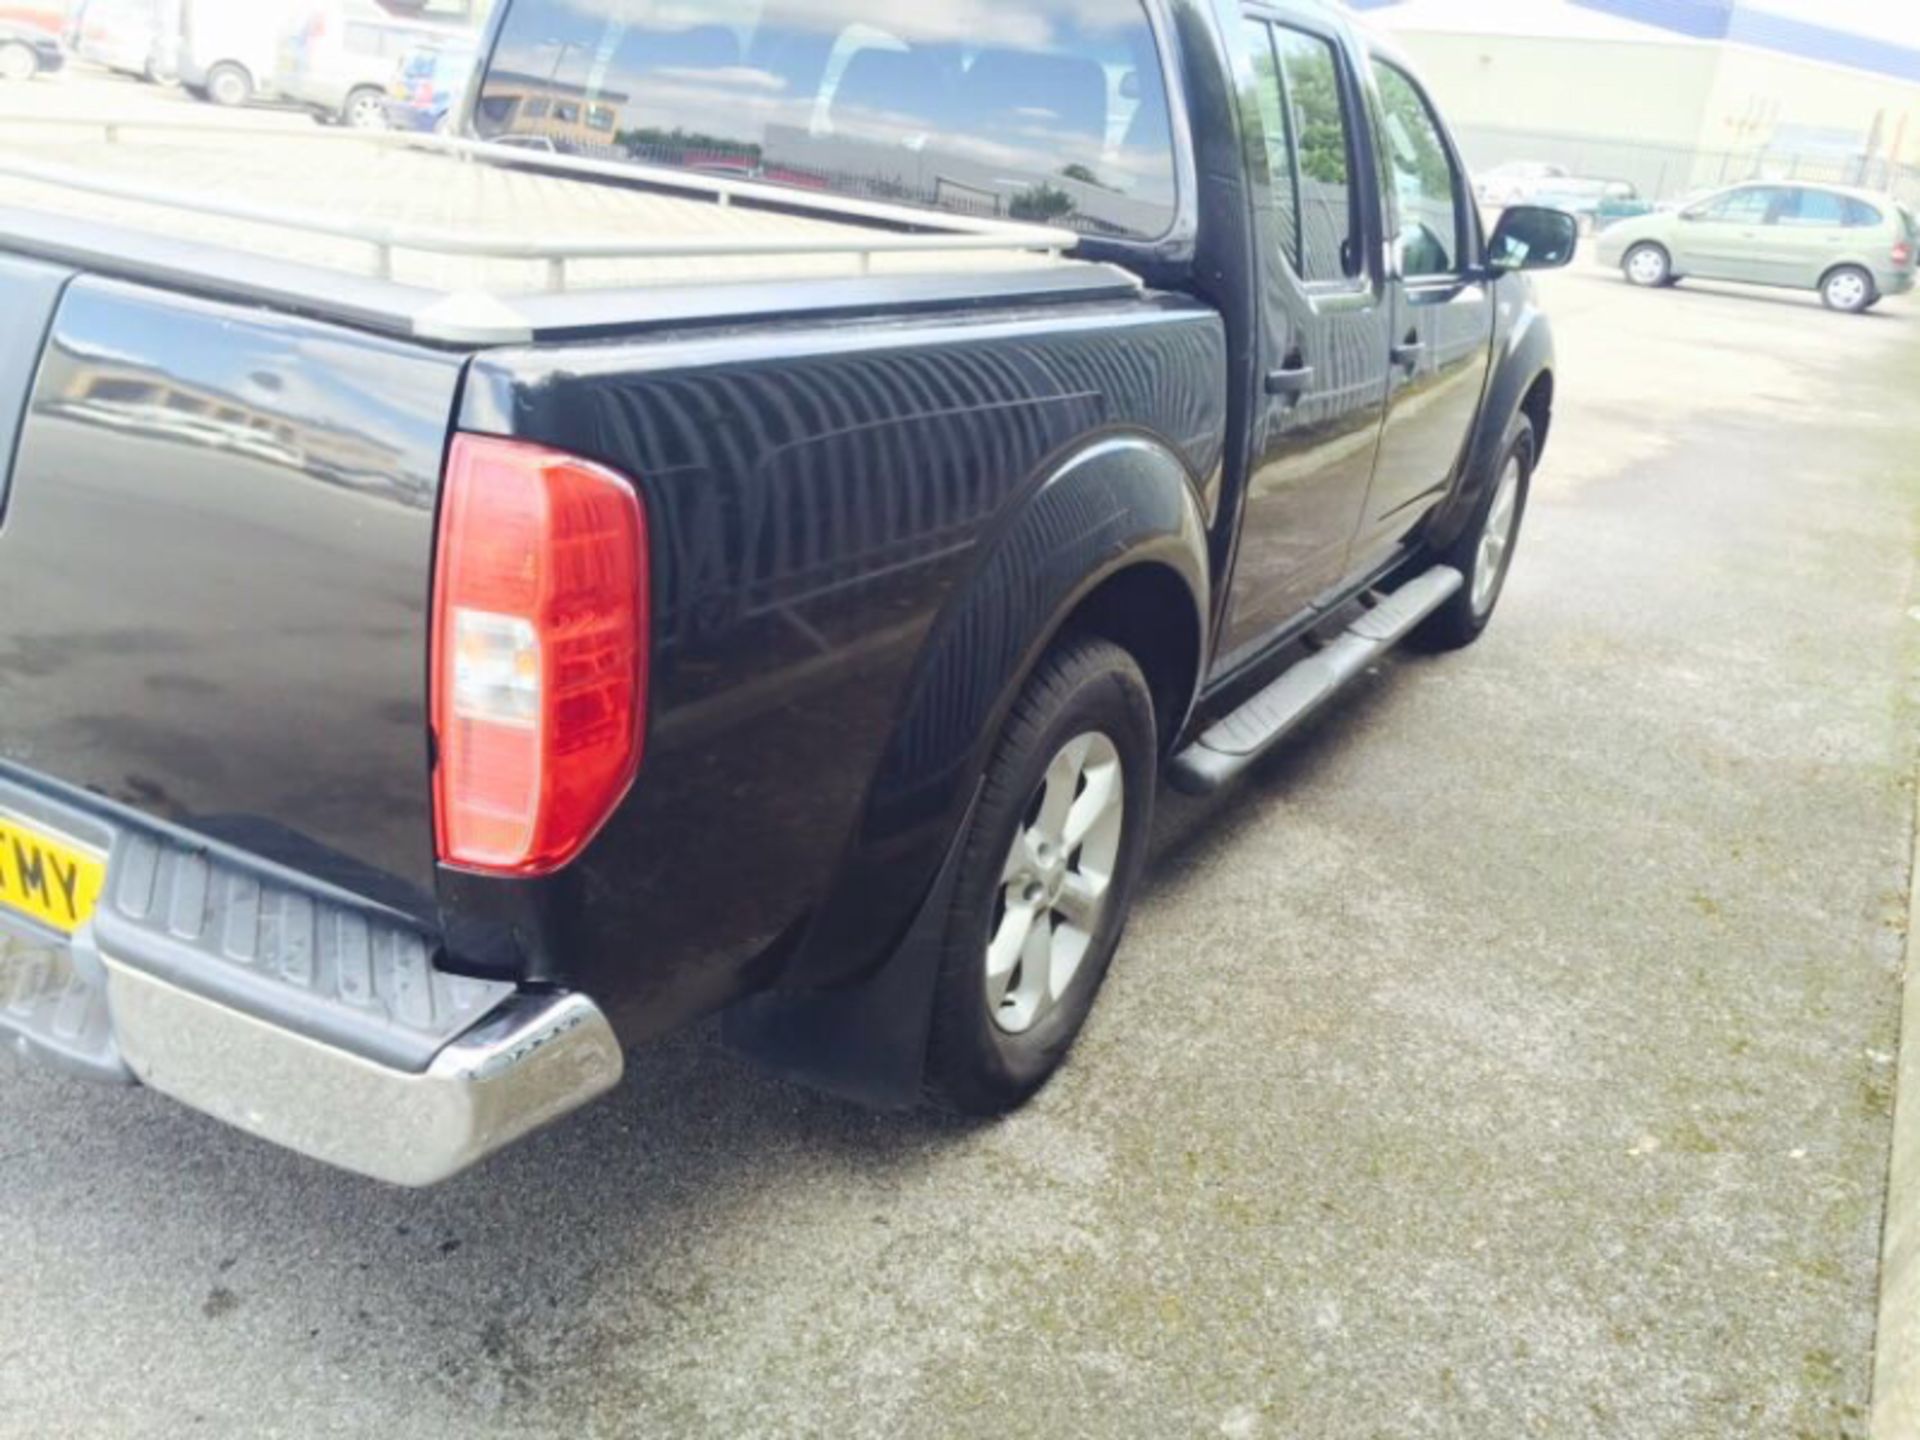 (On Sale) NISSAN NAVARA 2.5DCI - "OUTLAW" DOUBLE CAB - BLACK EDITION - 2006 - GREAT SPEC - NO VAT - Image 6 of 11